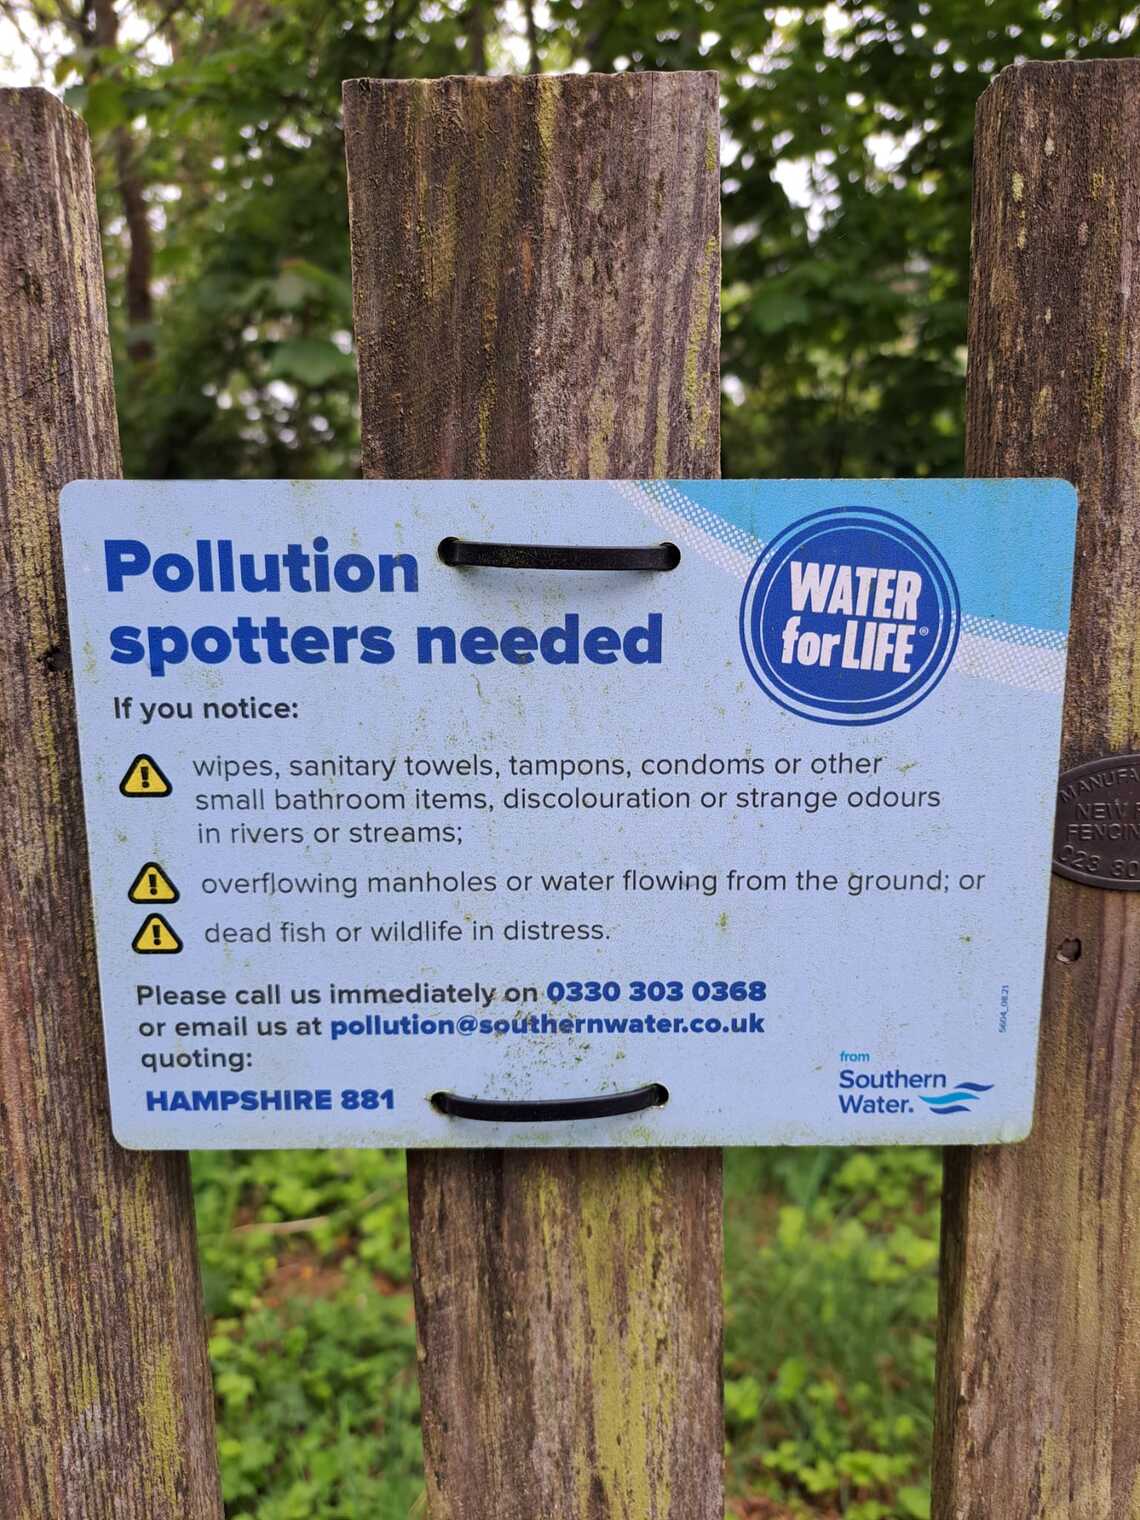 Pollution spotter notice from Southern Water